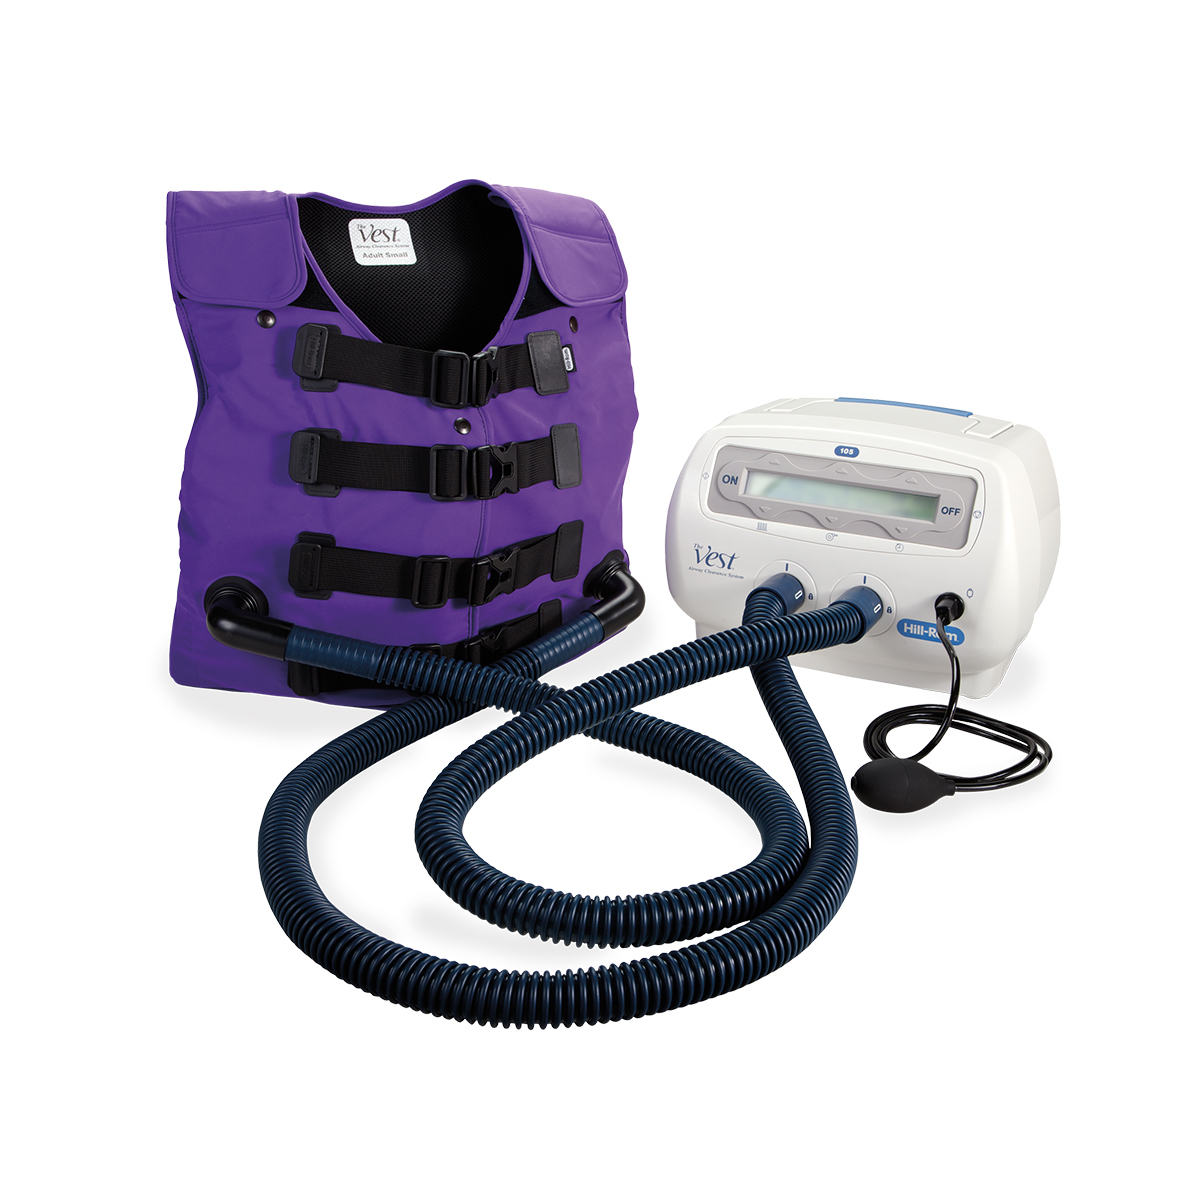 THE VEST, Respiratory Care, Products